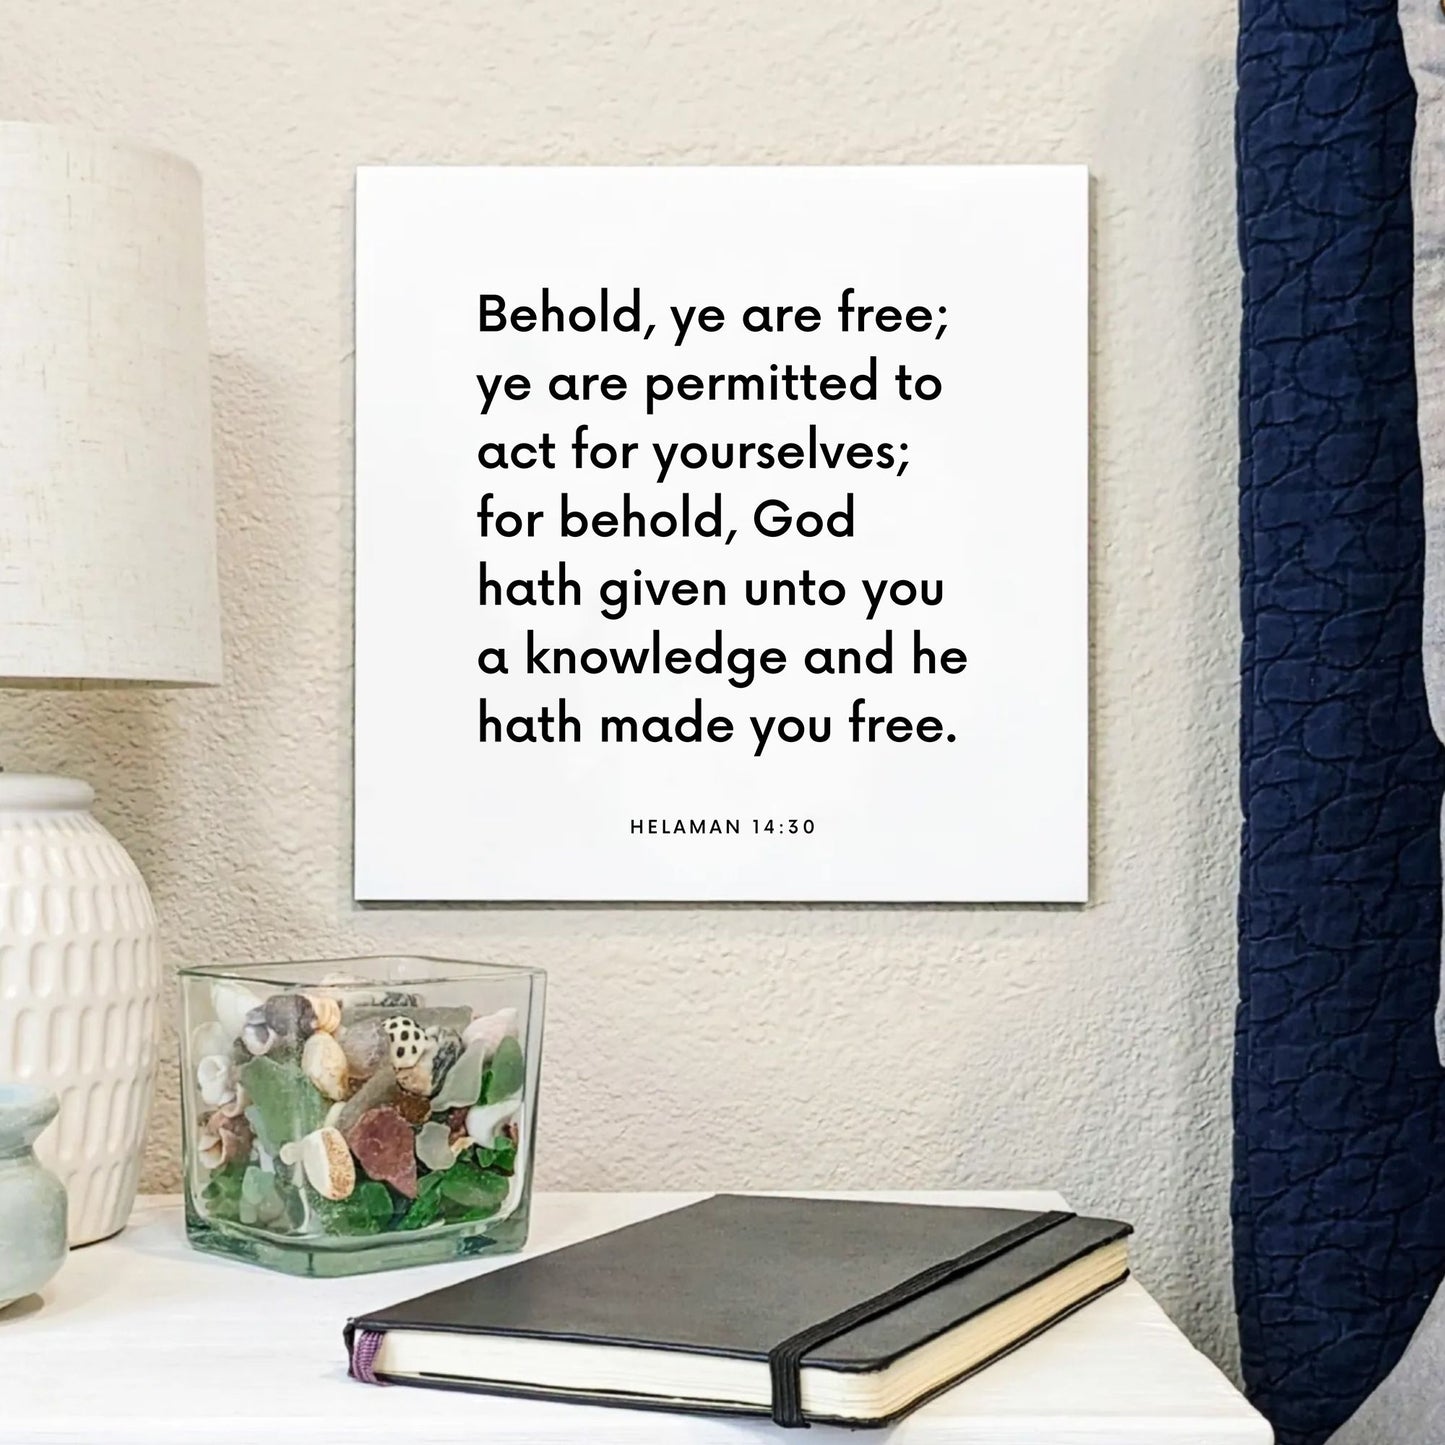 Bedside mouting of the scripture tile for Helaman 14:30 - "Behold, ye are free; ye are permitted to act for yourselves"